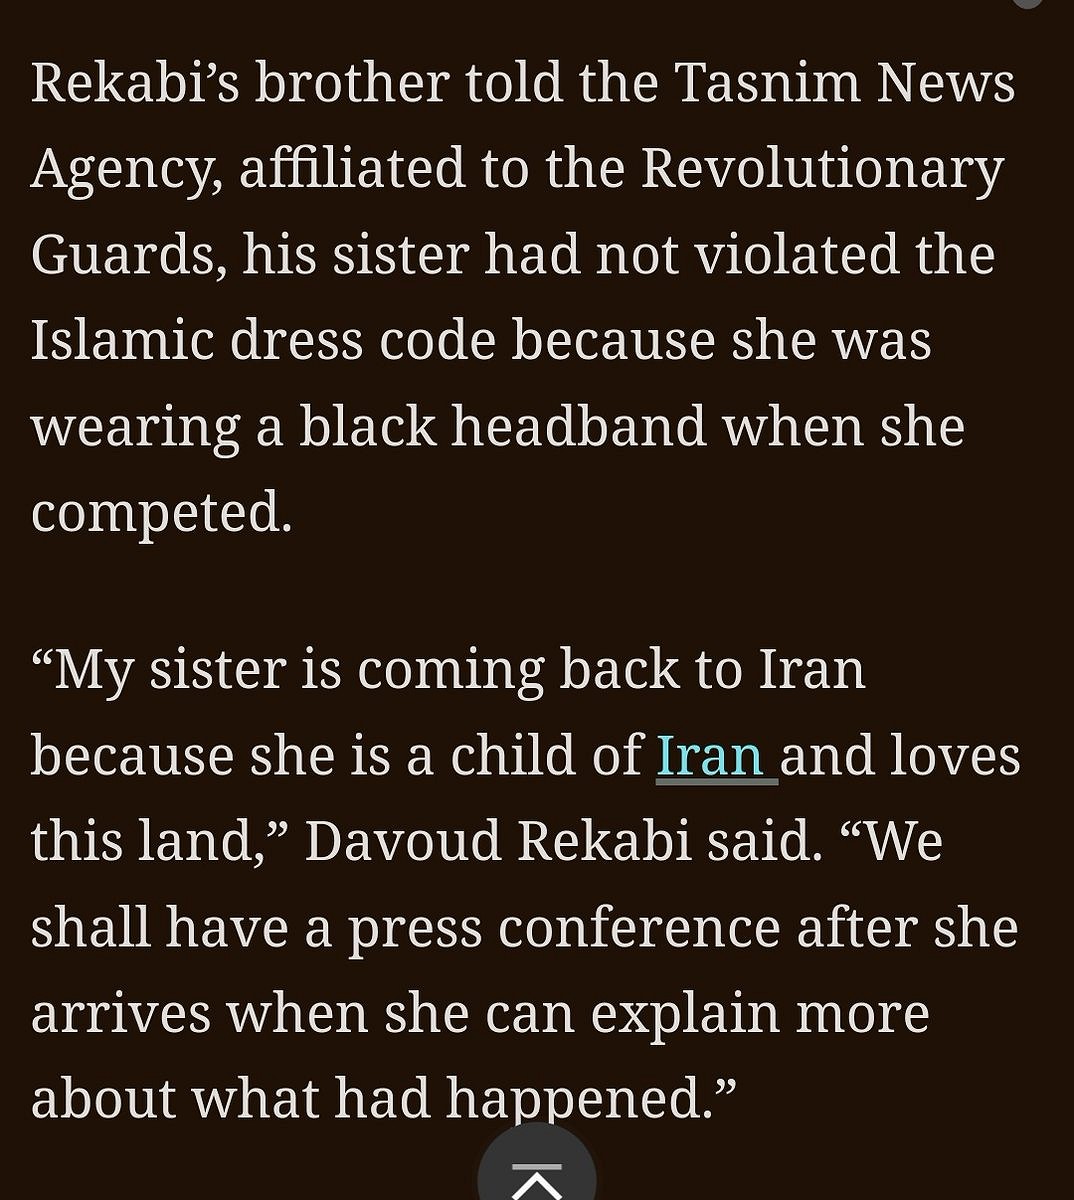 Quote from Elnaz Rekabi's brother.  © UKC News